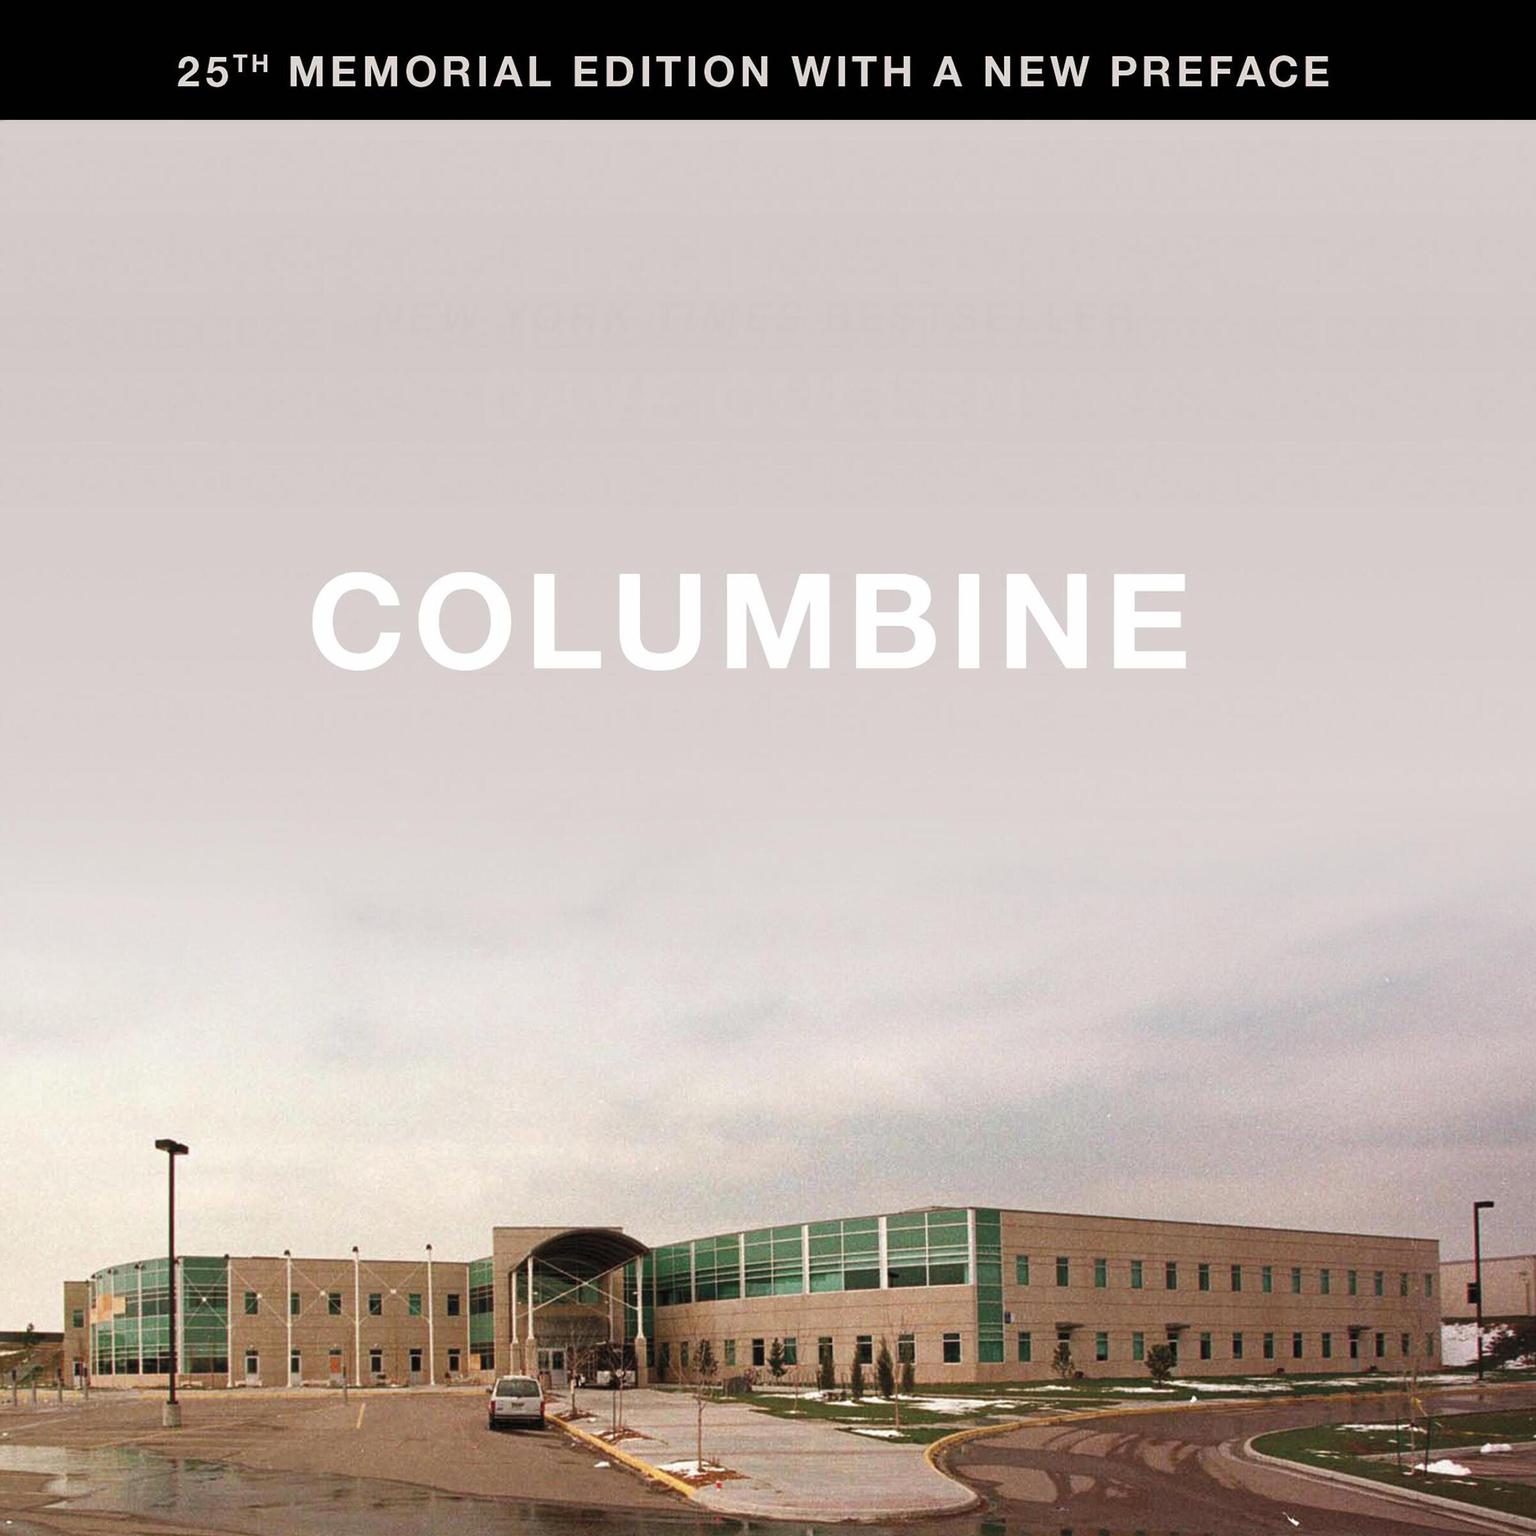 Columbine 25th Anniversary Memorial Edition Audiobook, by Dave Cullen